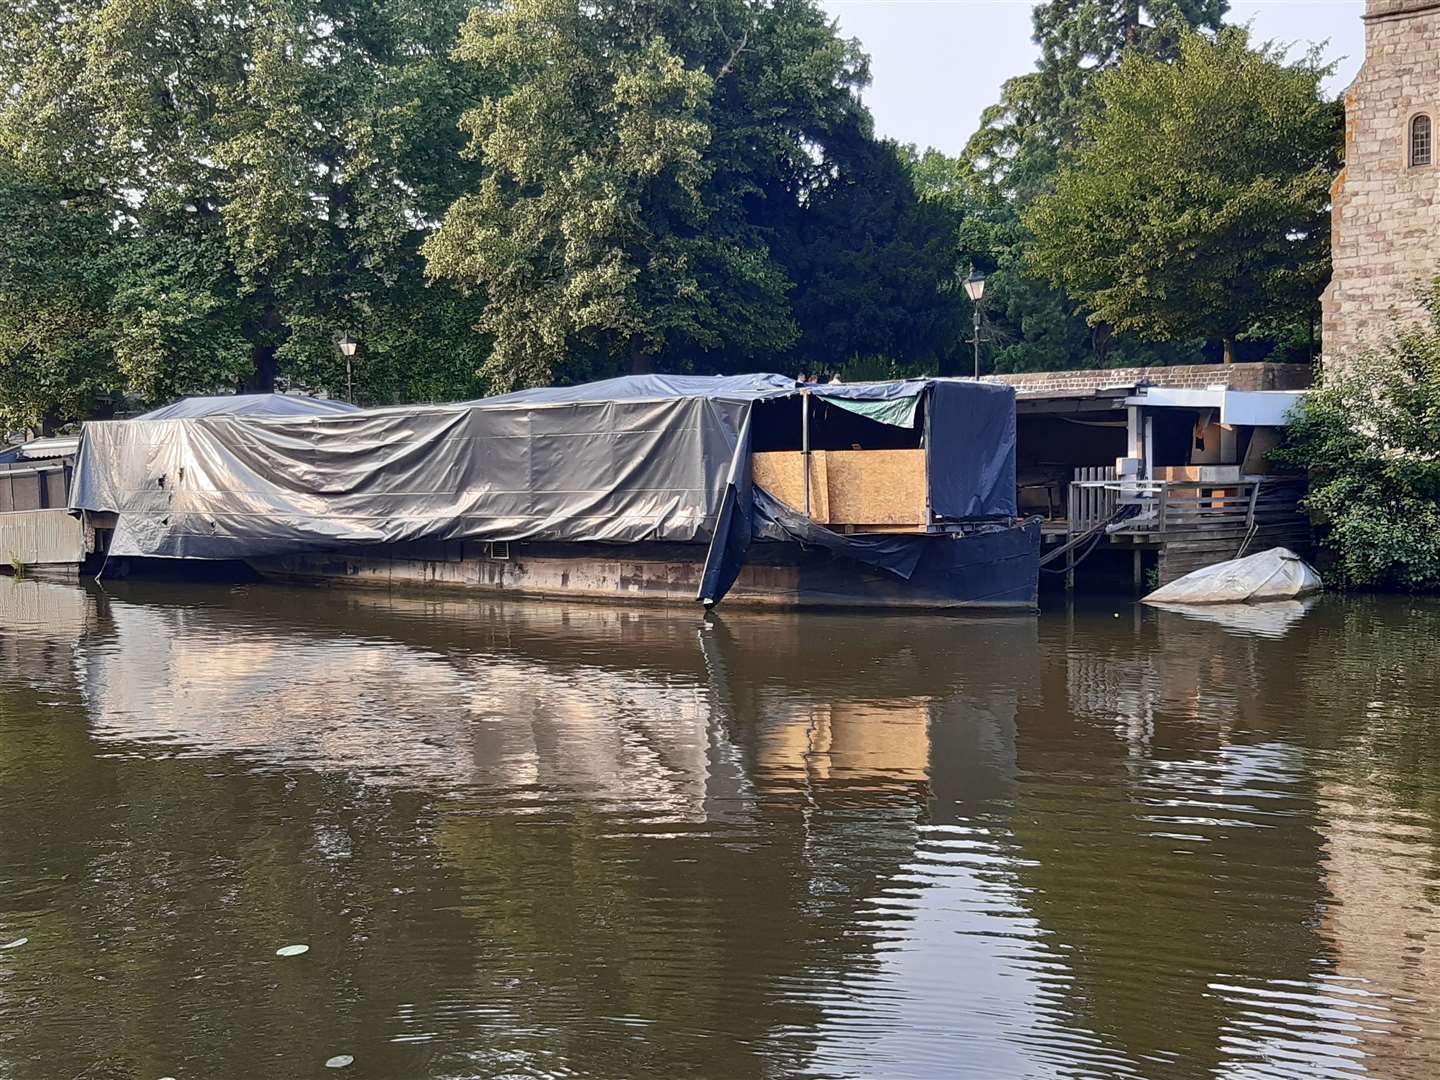 The barge restaurant on the River Medway in Maidstone in July 2021